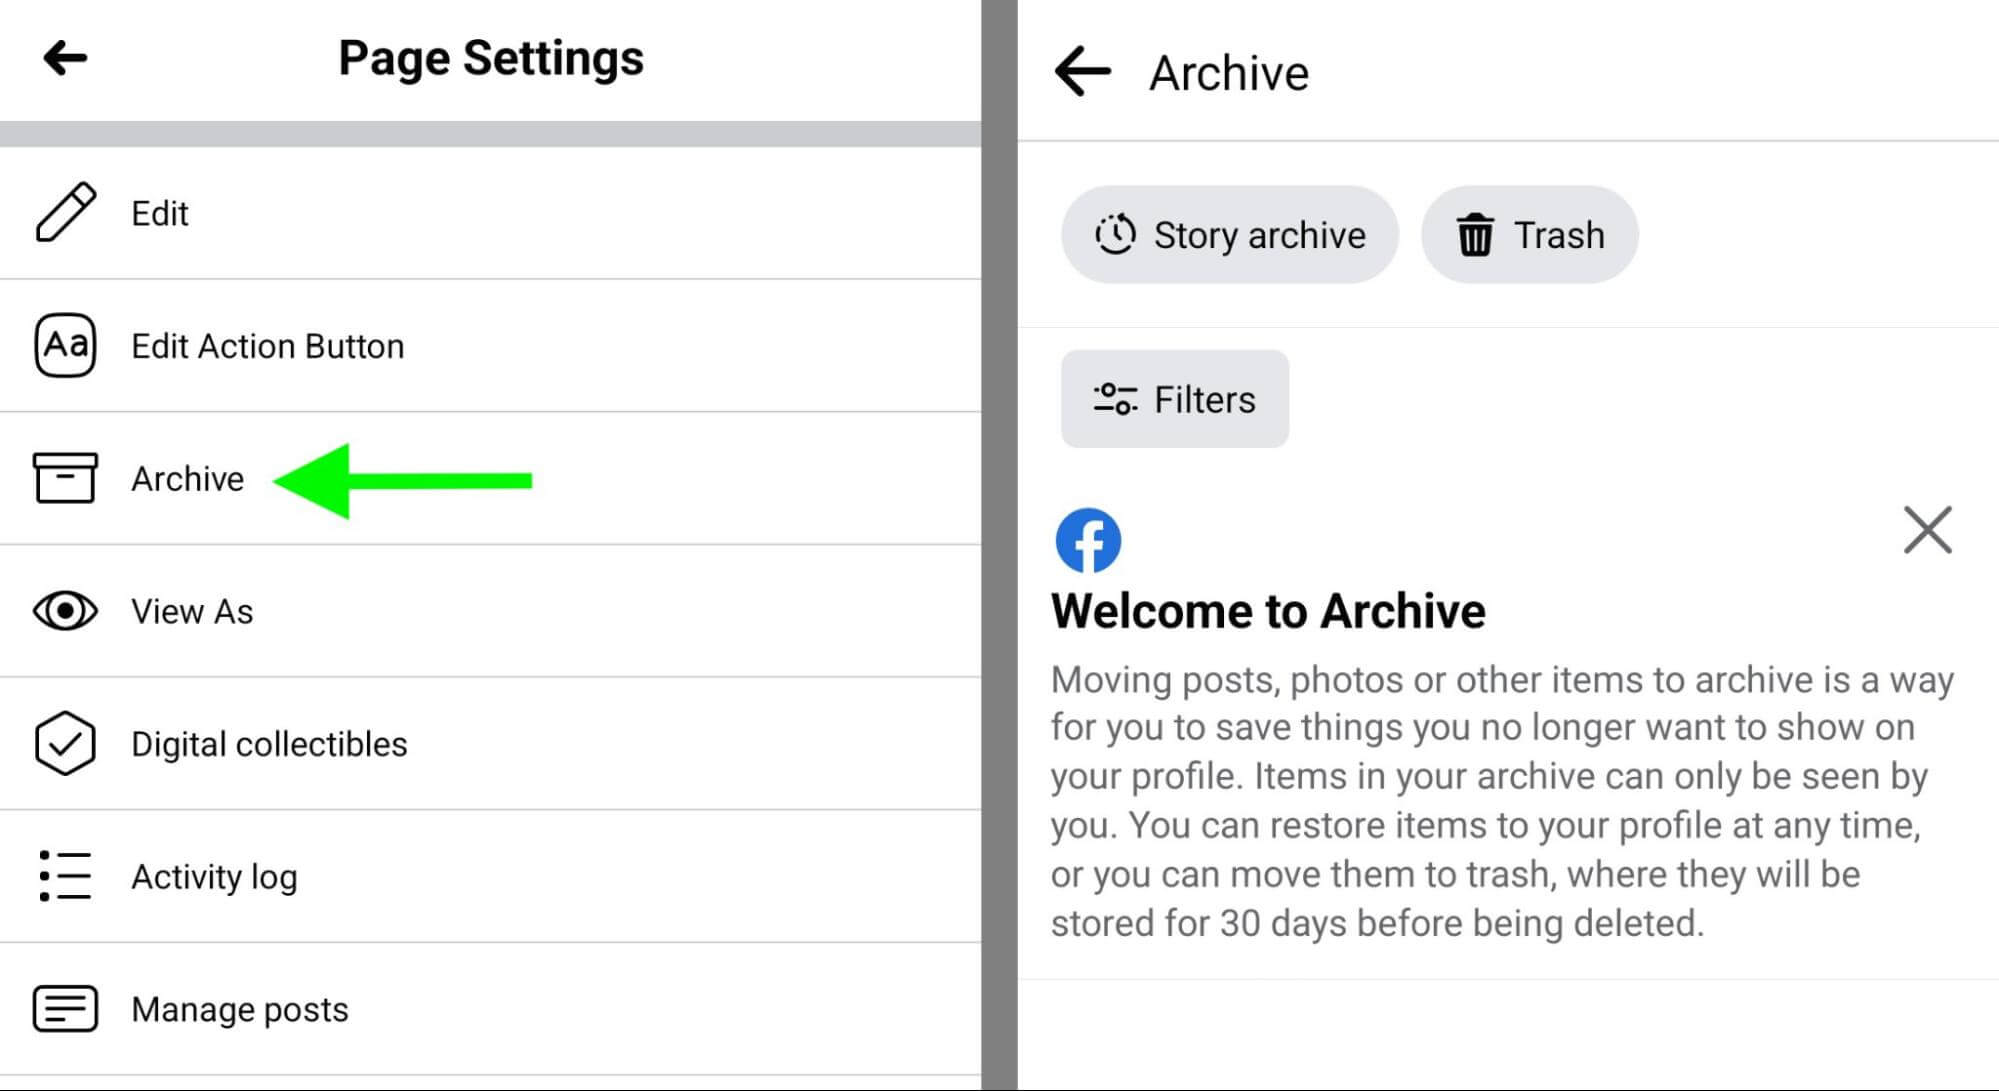 how-to-archive-facebook-page-content-on-mobile-tap-archive-story-archive-move-content-from-trash-example-7